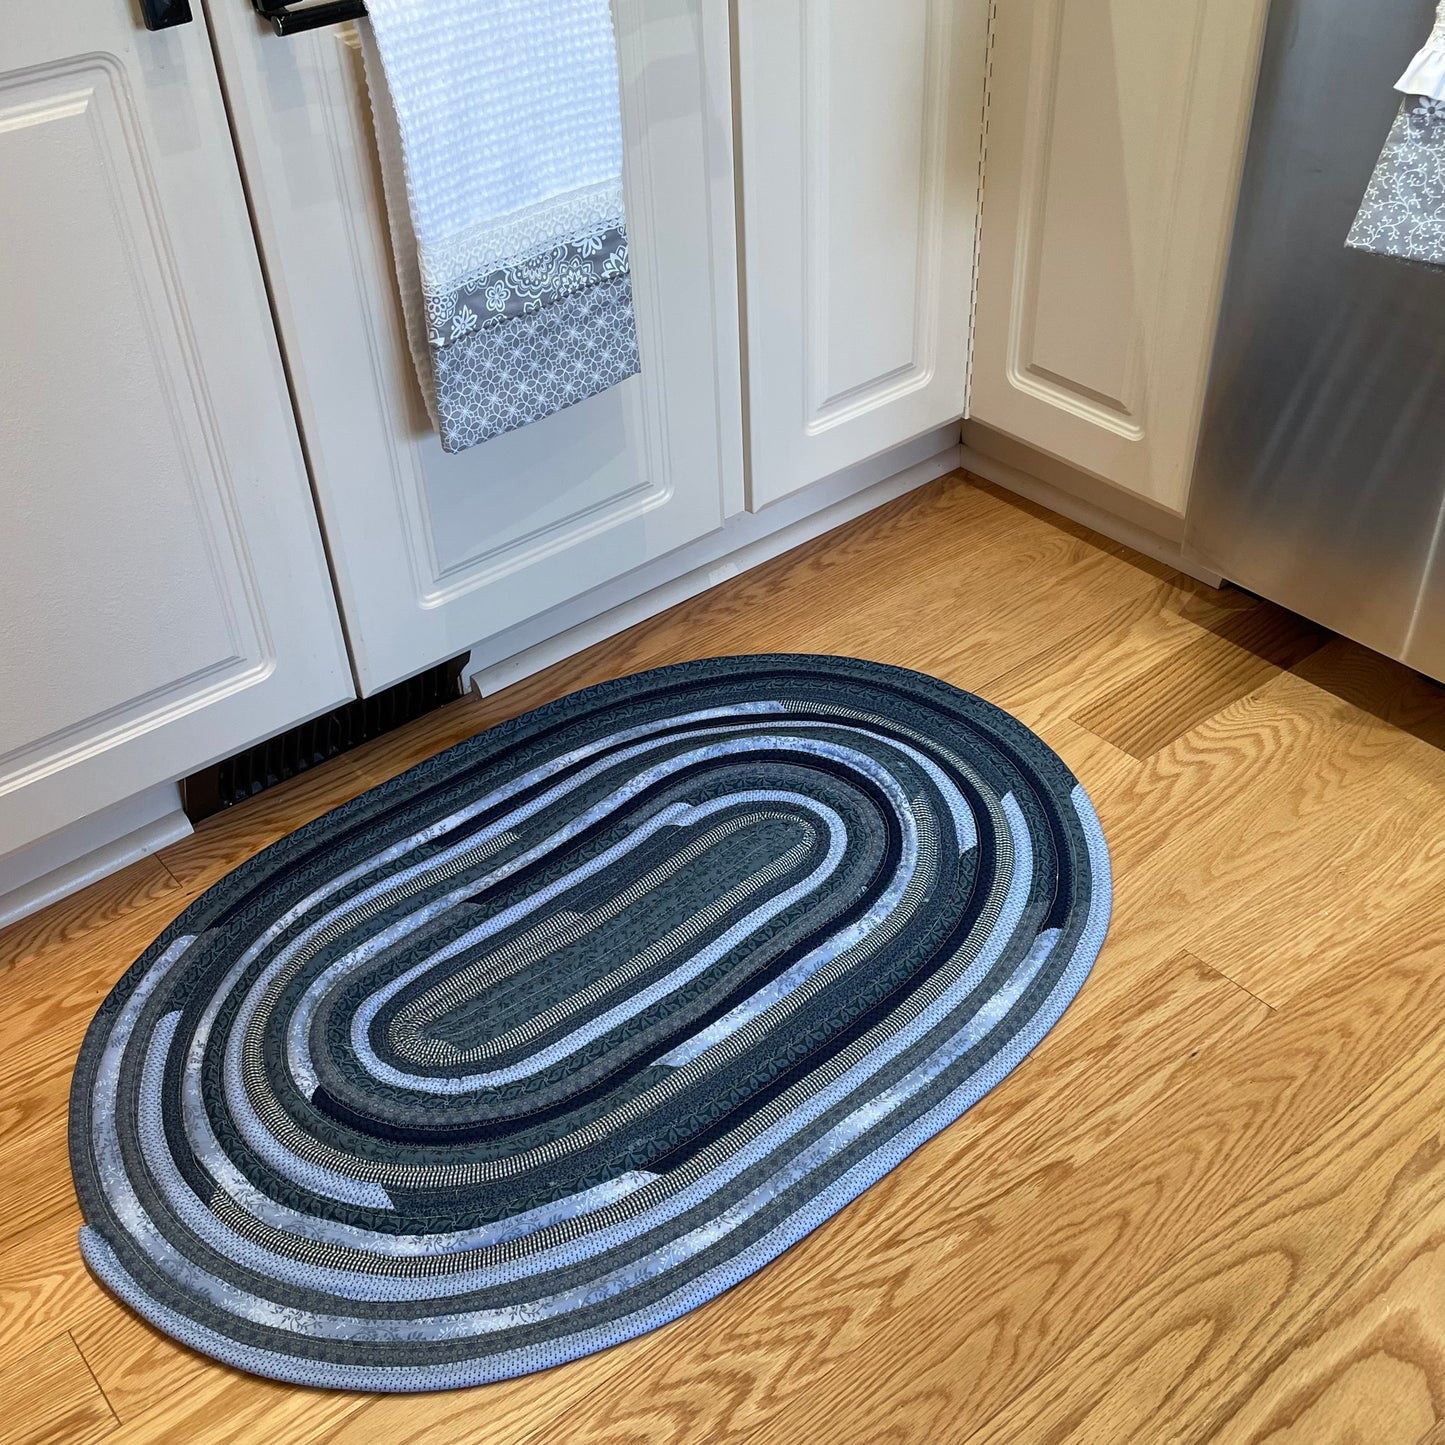 Navy Blue Farmhouse Kitchen Accent Rug - Handmade in Canada, Cotton Fabric, Washable